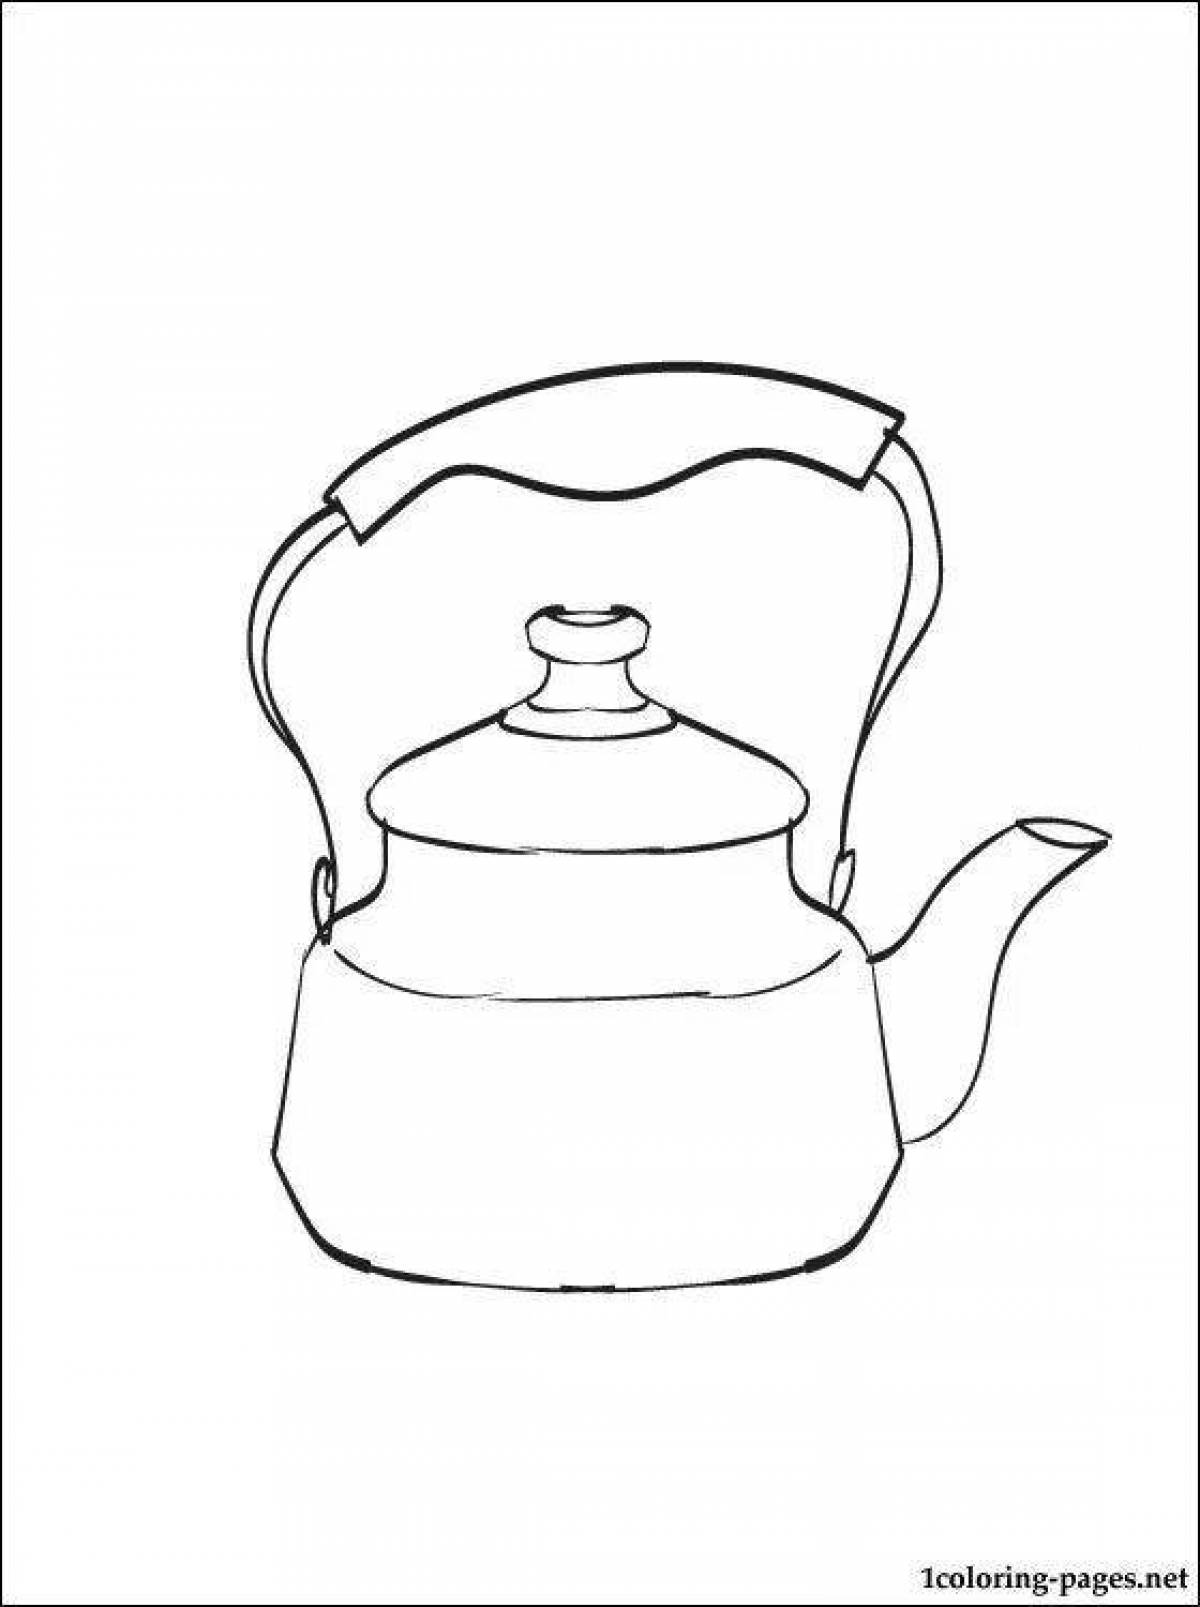 Traditional teapot coloring page